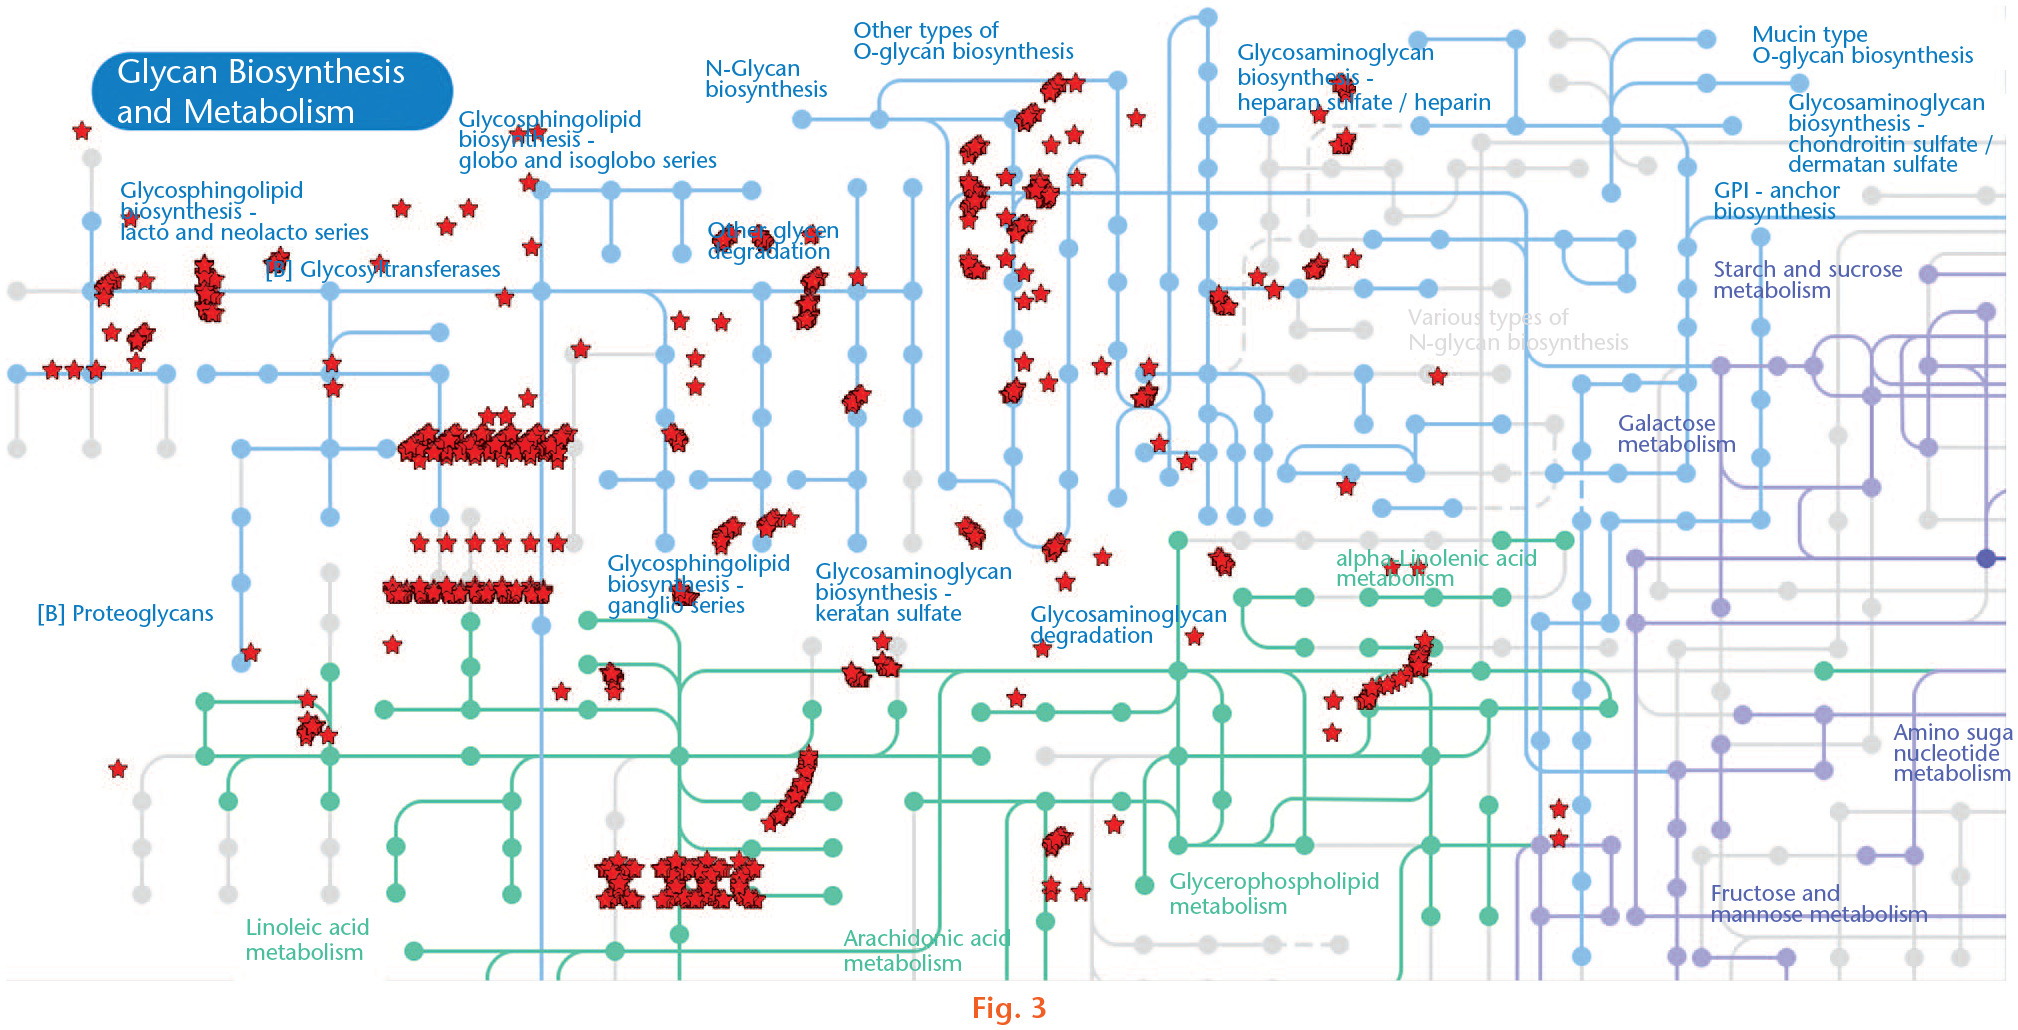 Fig. 3 
            Upregulation of the metabolic pathway glycan biosynthesis and metabolism by physical exercise. The image shows the Kyoto Encyclopedia of Genes and Genomes (KEGG) pathway in which 61 upregulated genes were associated using the DAVID Bioinformatics Resources 6.8 platform (Laboratory of Human Retrovirology and Immunoinformatics, Frederick, Maryland, USA).
          